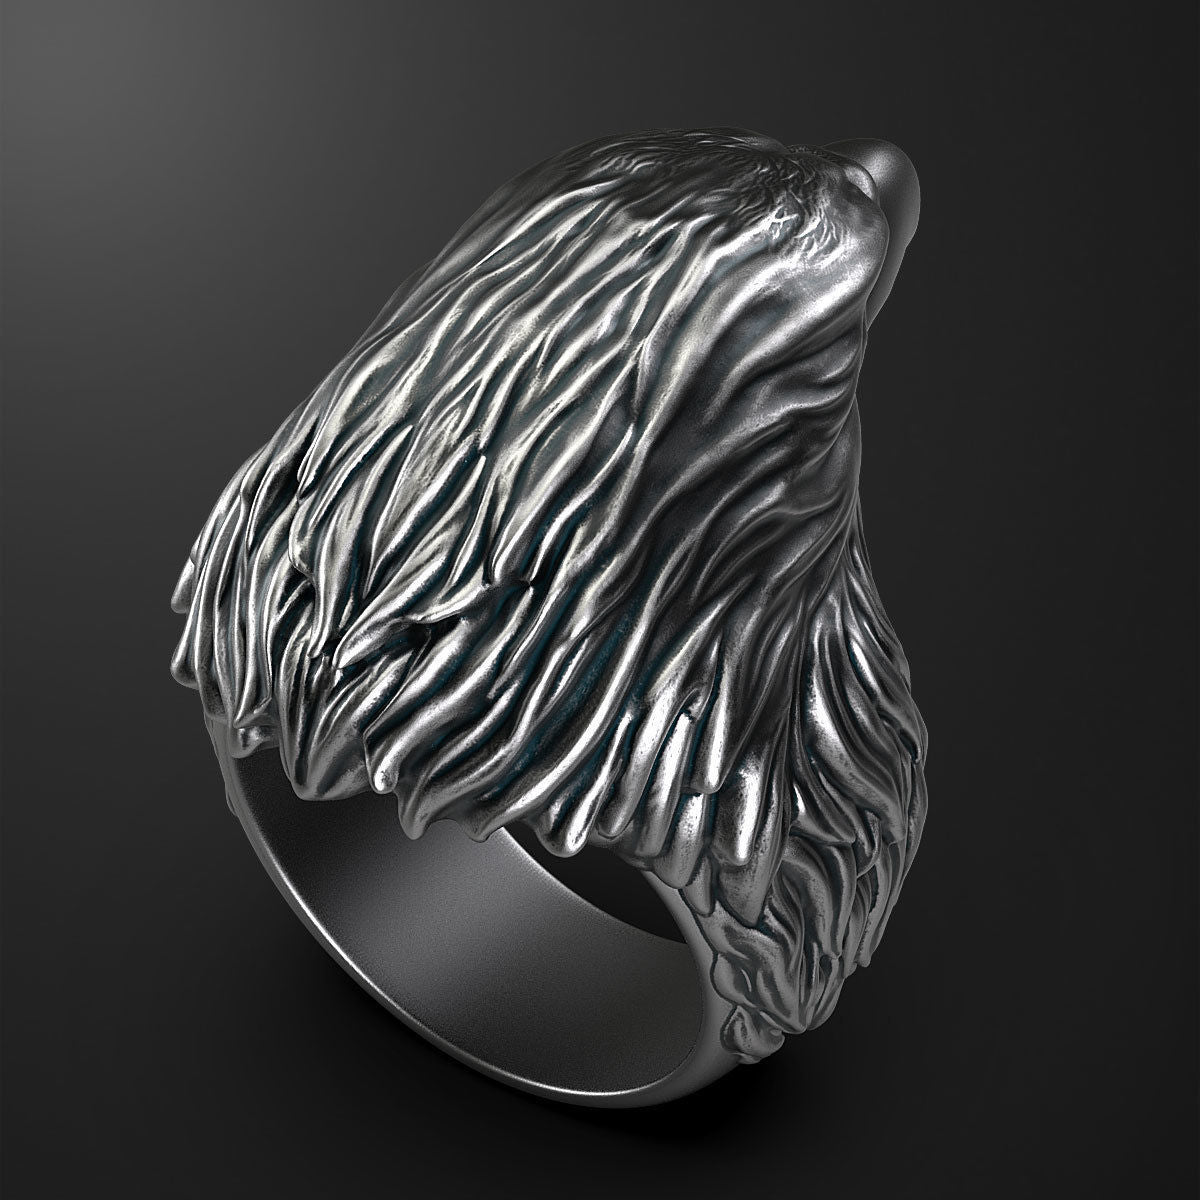 RARE PRINCE by CARAT SUTRA | Unique Designed Eagle Ring | 925 Sterling Silver Oxidized Ring | Men's Jewelry | With Certificate of Authenticity and 925 Hallmark - caratsutra